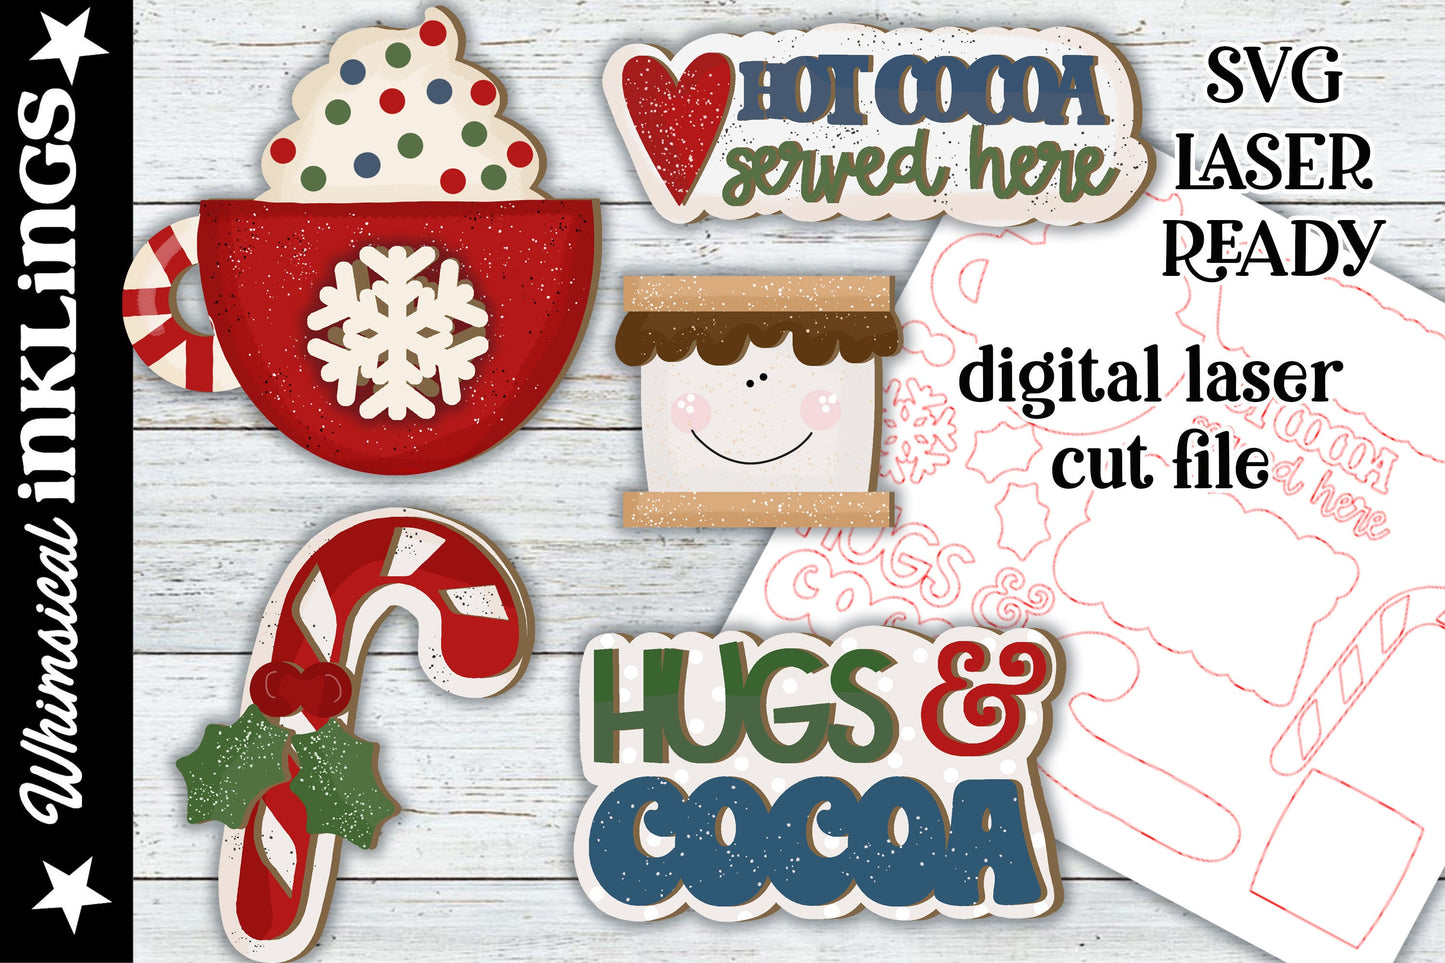 Hugs and Cocoa Laser SVG| Laser Cut Cocoa Bar| Glow forge| Cocoa Bar Laser SVG